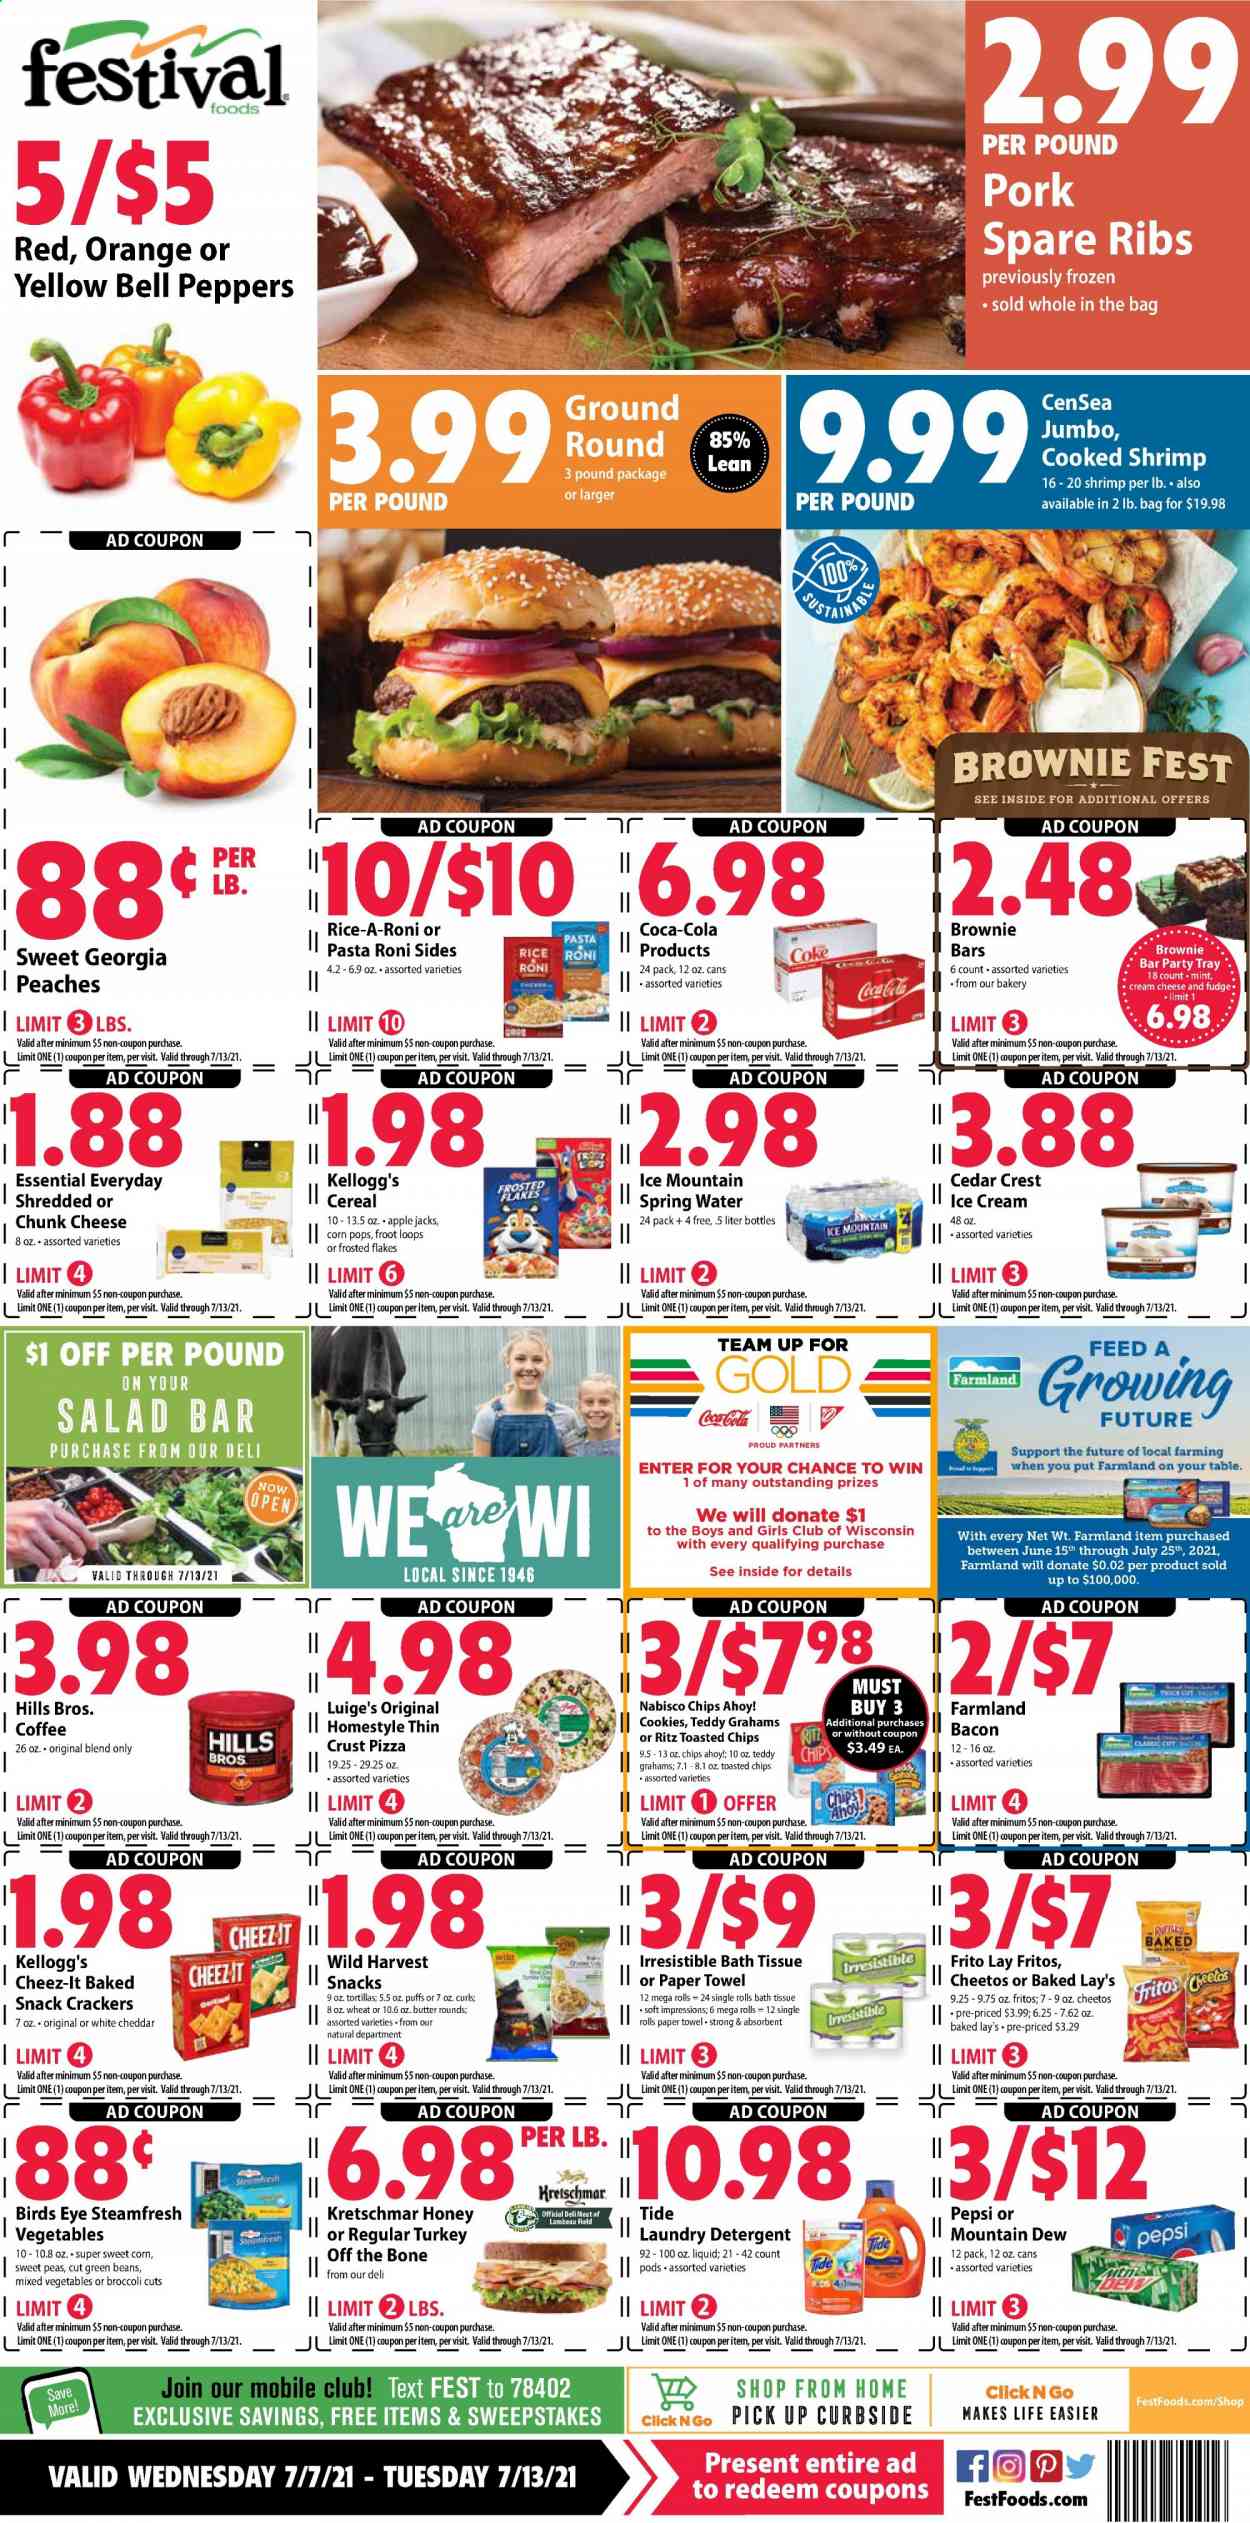 thumbnail - Festival Foods Flyer - 07/07/2021 - 07/13/2021 - Sales products - tortillas, puffs, brownies, bell peppers, broccoli, green beans, salad, peppers, sweet corn, Wild Harvest, oranges, shrimps, pizza, pasta, Bird's Eye, chunk cheese, butter, ice cream, mixed vegetables, cookies, fudge, snack, crackers, Kellogg's, Chips Ahoy!, RITZ, Fritos, Cheetos, Lay’s, Cheez-It, cereals, Frosted Flakes, Corn Pops, rice, Coca-Cola, Mountain Dew, Pepsi, spring water, Ice Mountain, coffee, pork meat, pork ribs, pork spare ribs, bath tissue, paper towels, detergent, Tide, laundry detergent, Crest, peaches. Page 1.